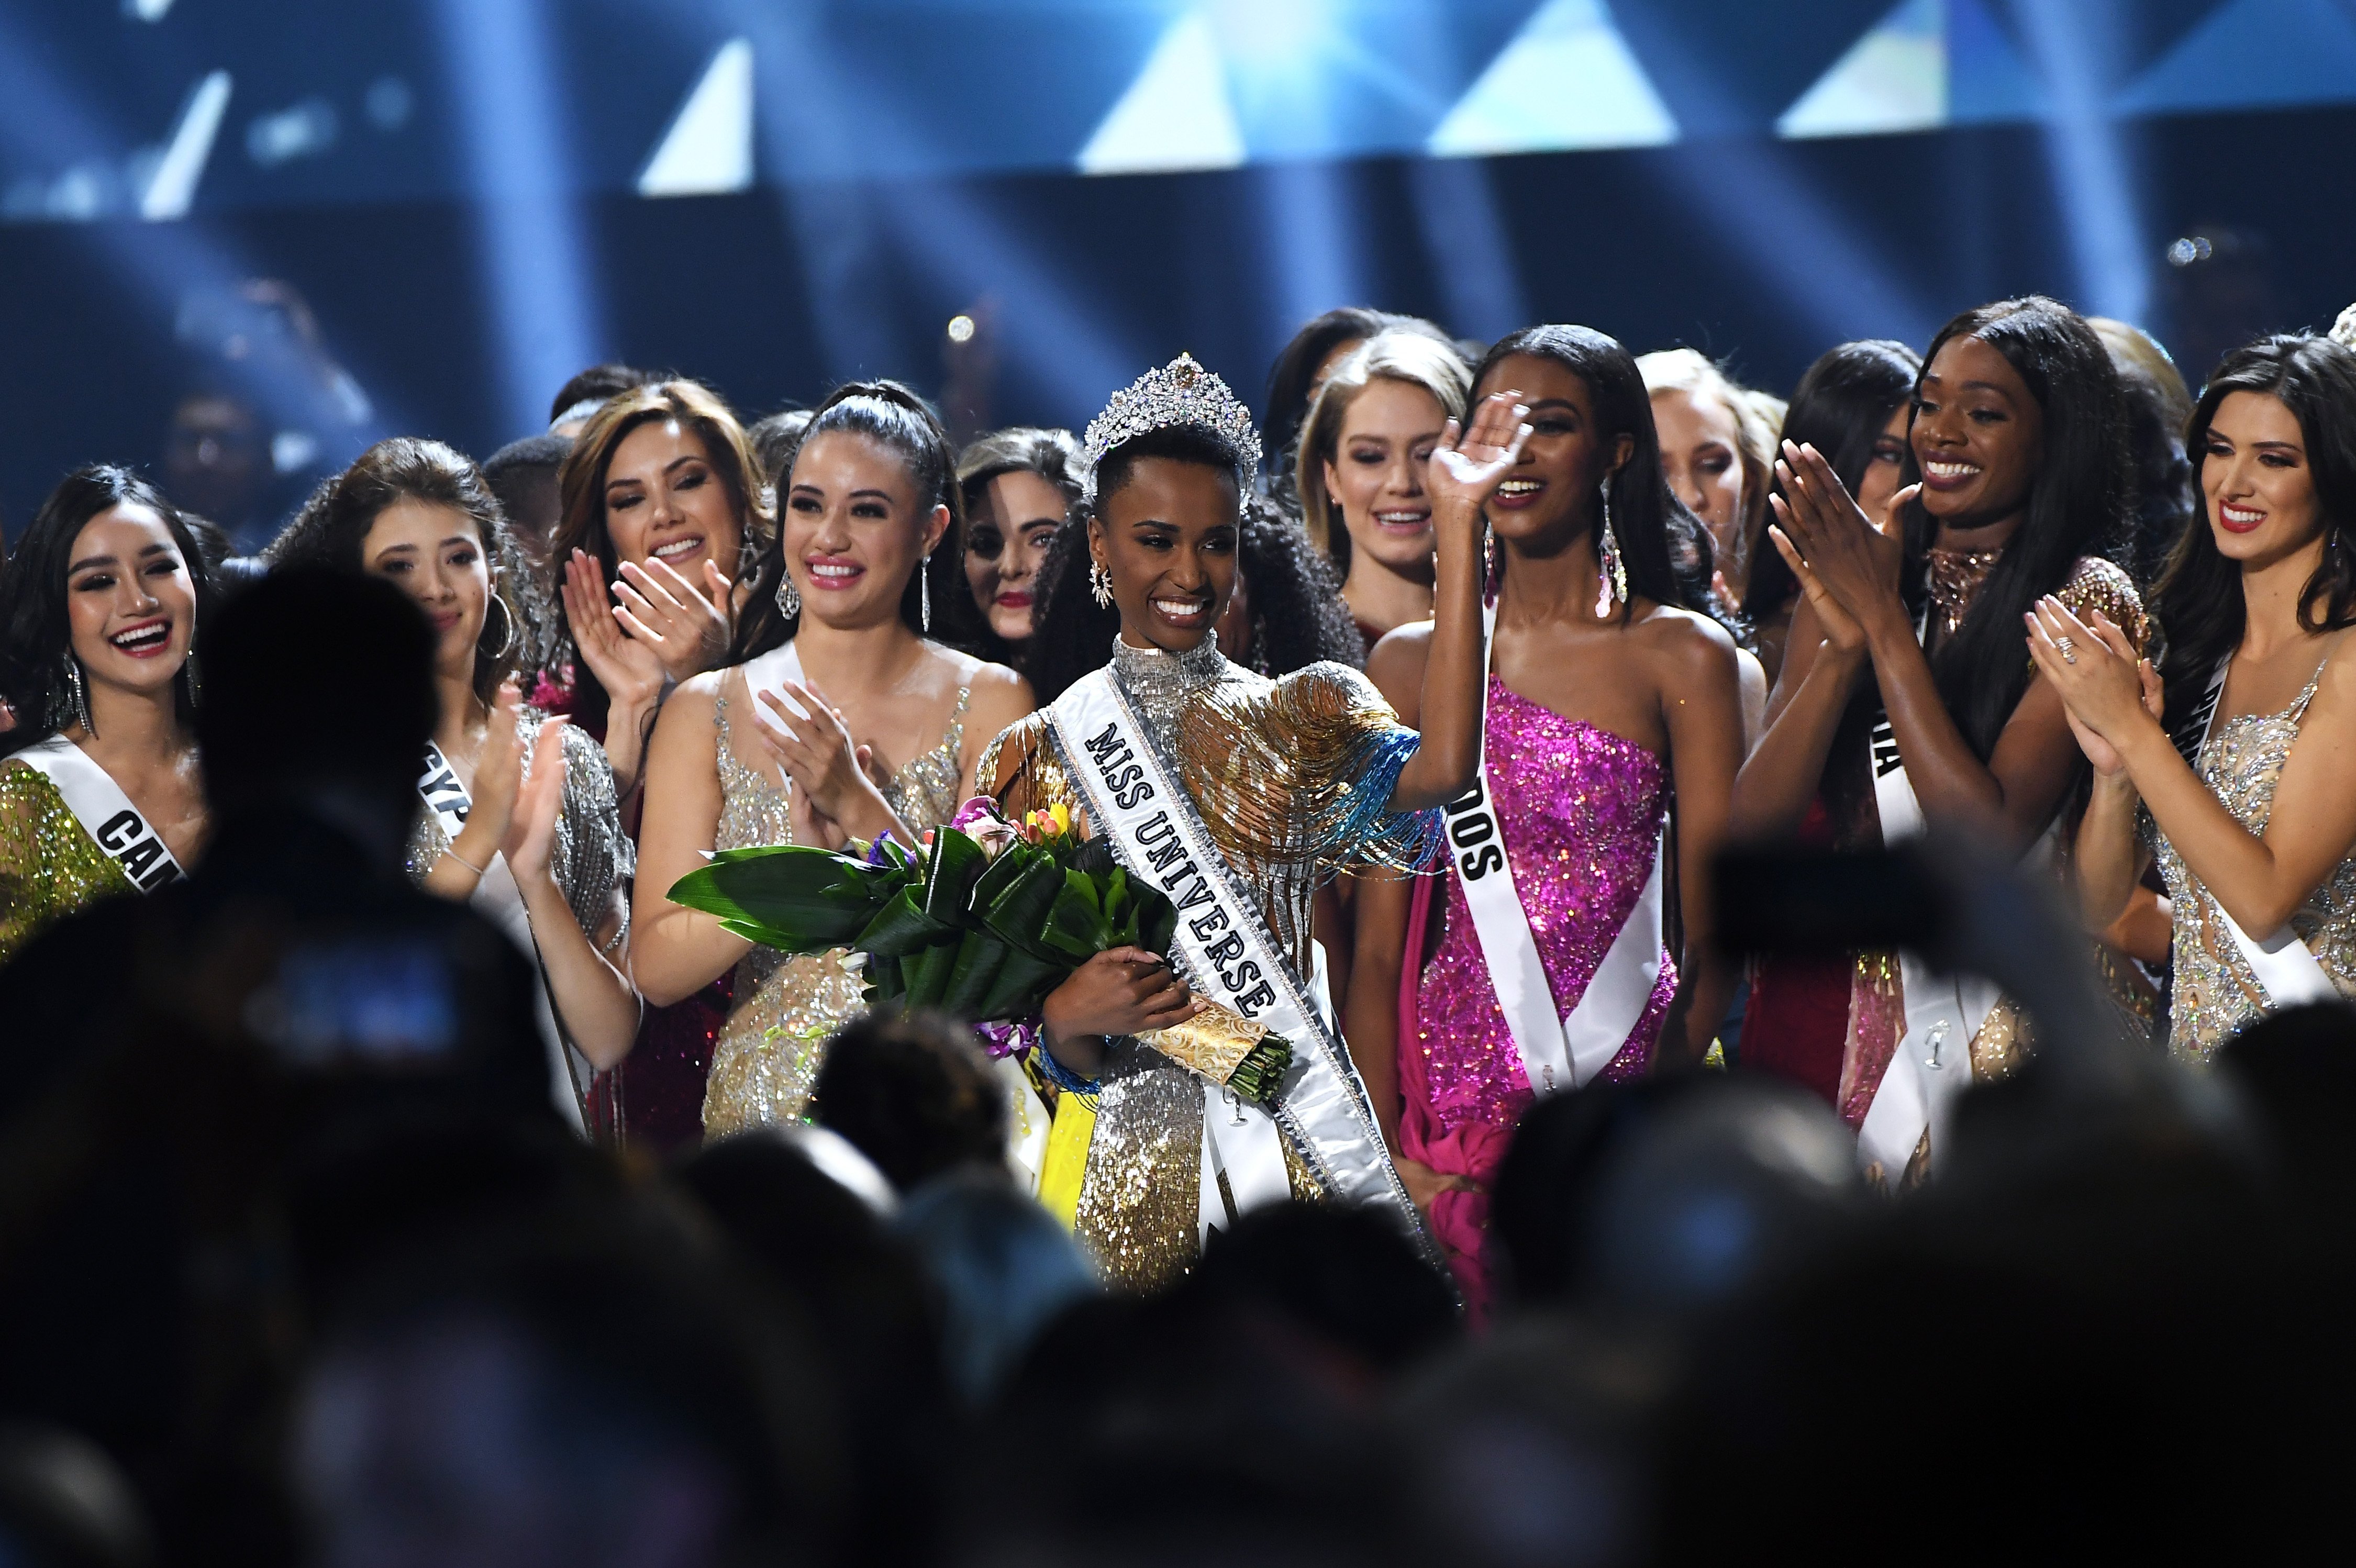 South African Zozibini Tunzi stands out amid a sea of beautiful women as she is crowned Miss Universe 2019. | Photo: Getty Images